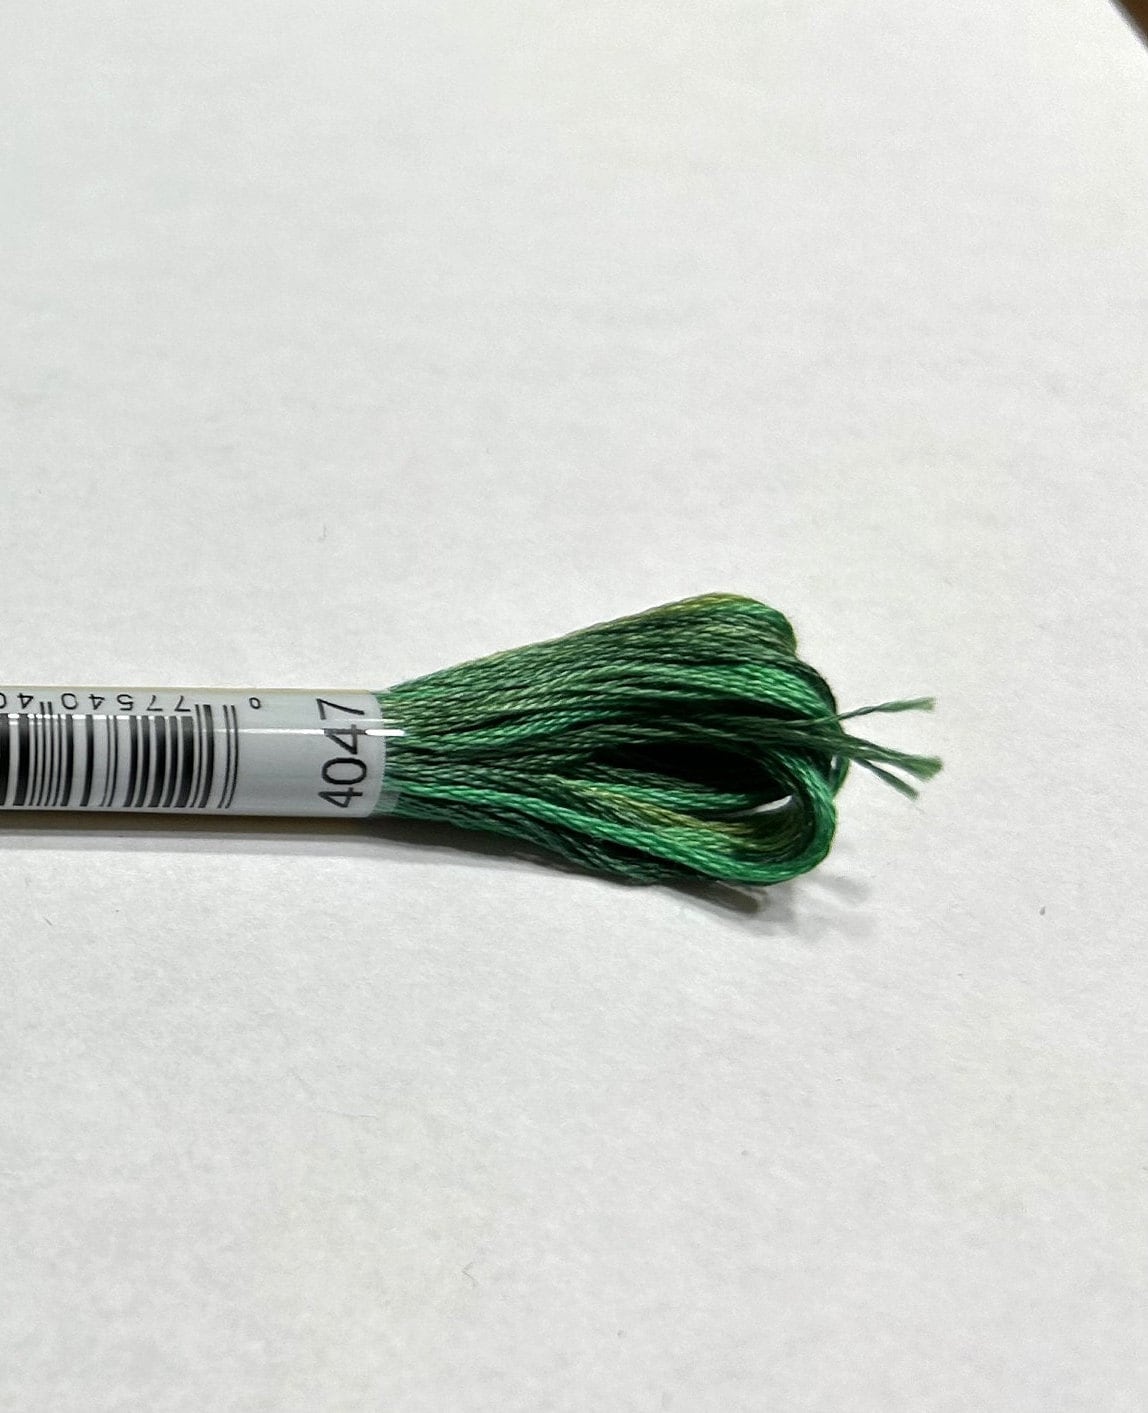 DMC 6-Strand Embroidery Cotton Floss, Light Pewter